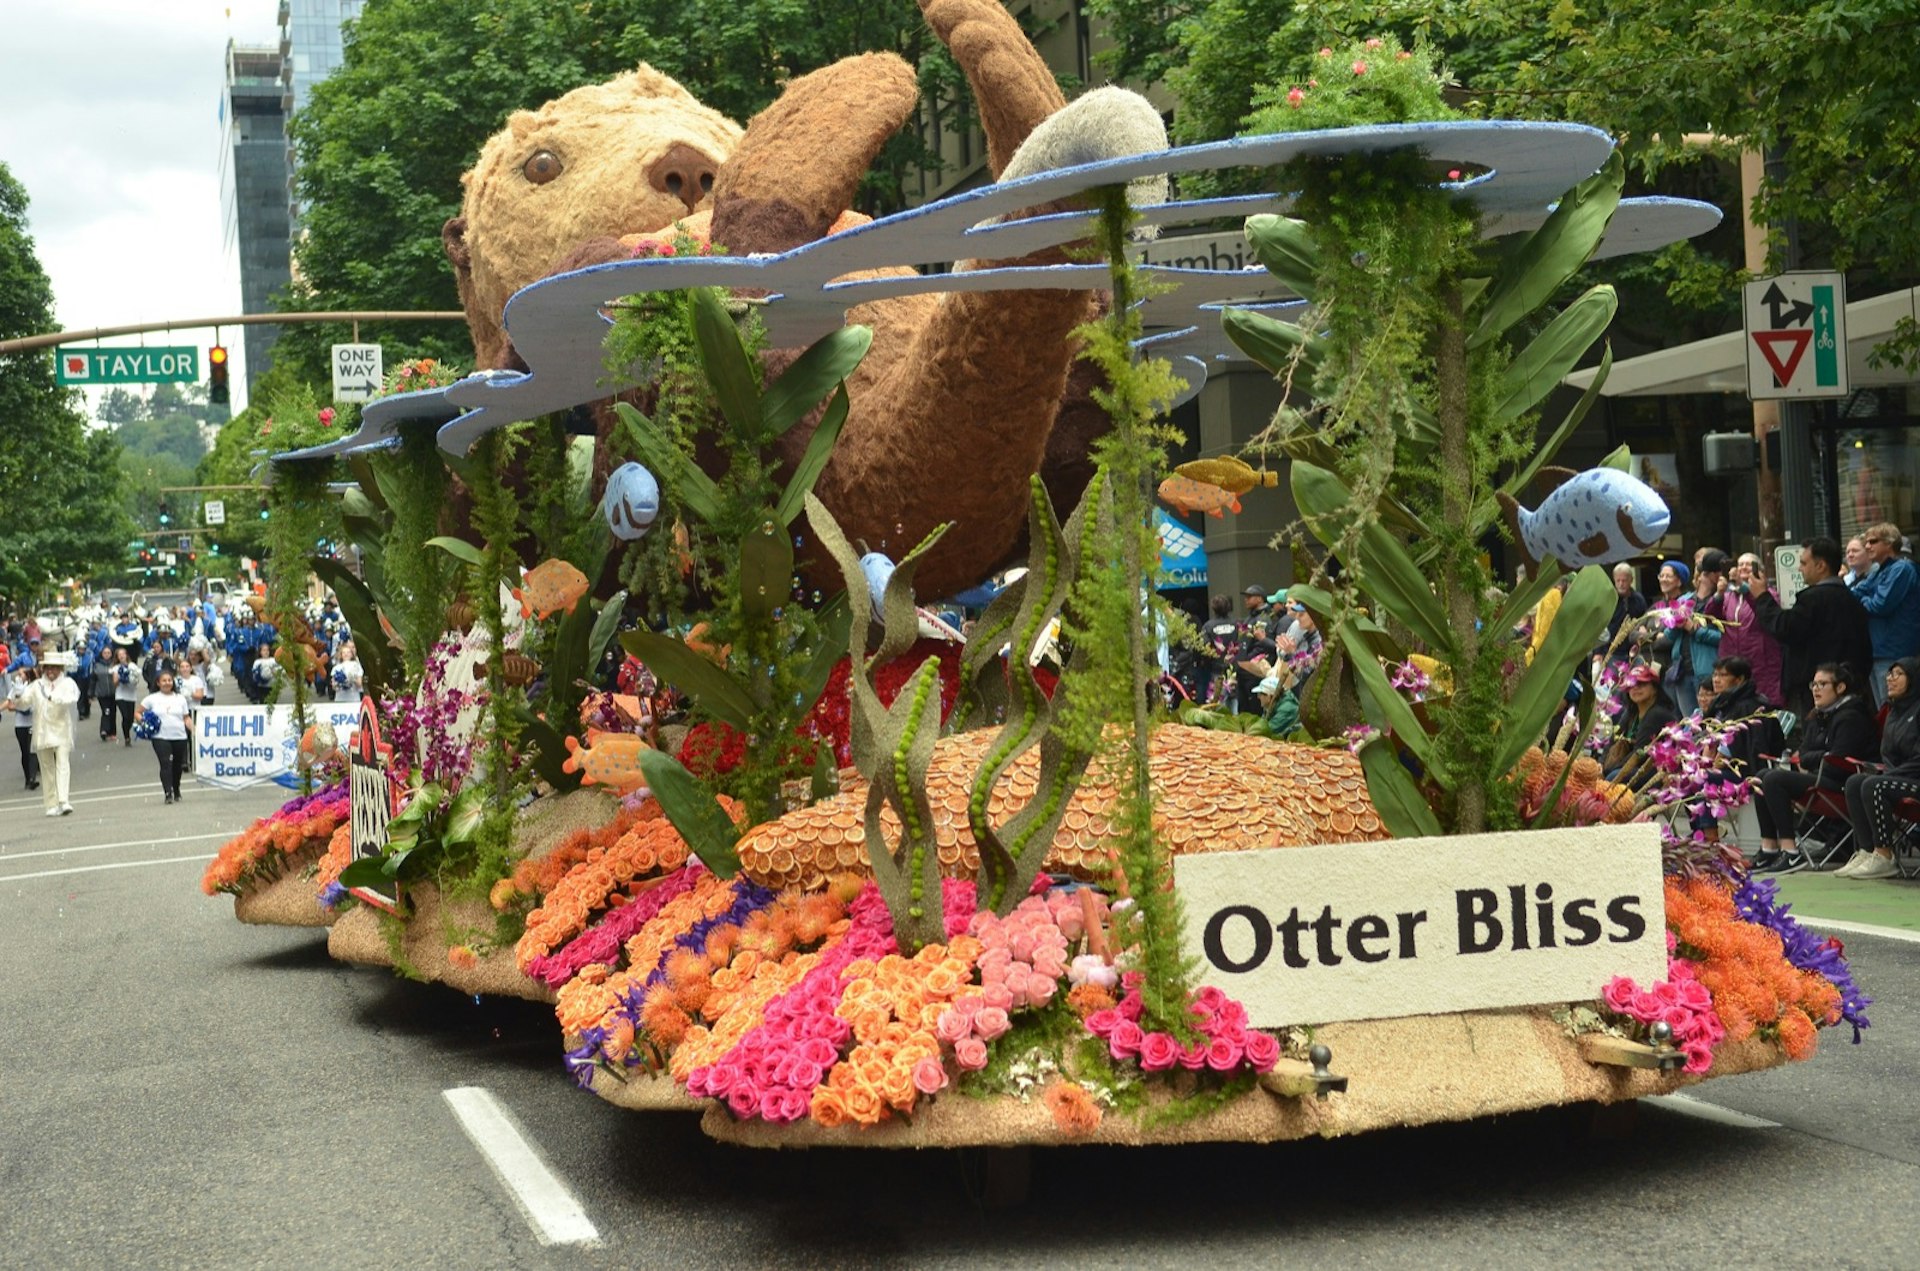 A float moves down a street in Portland, depicting an otter on its back